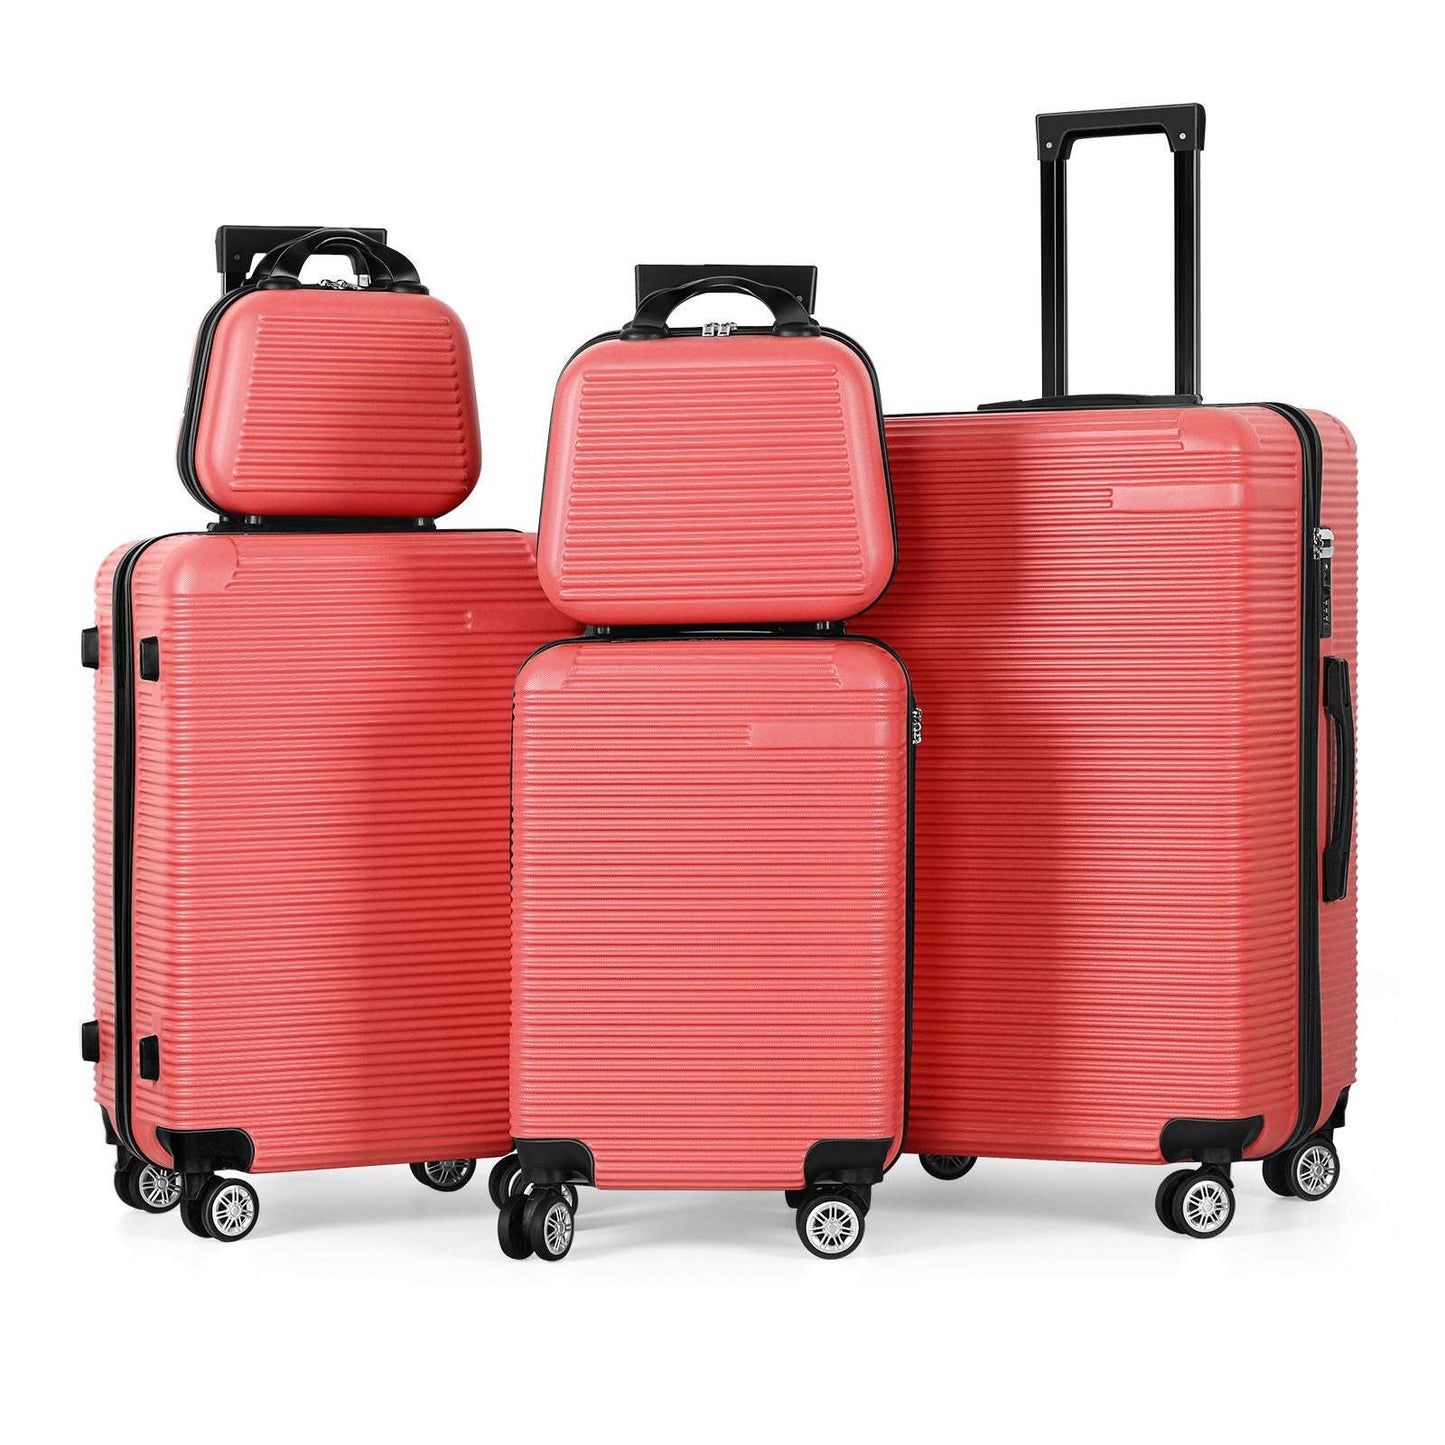 5-Piece ABS Luggage Set with TSA Lock, Includes 12",14",20", 24" & 28" 131 Luggage OK•PhotoFineArt OK•PhotoFineArt